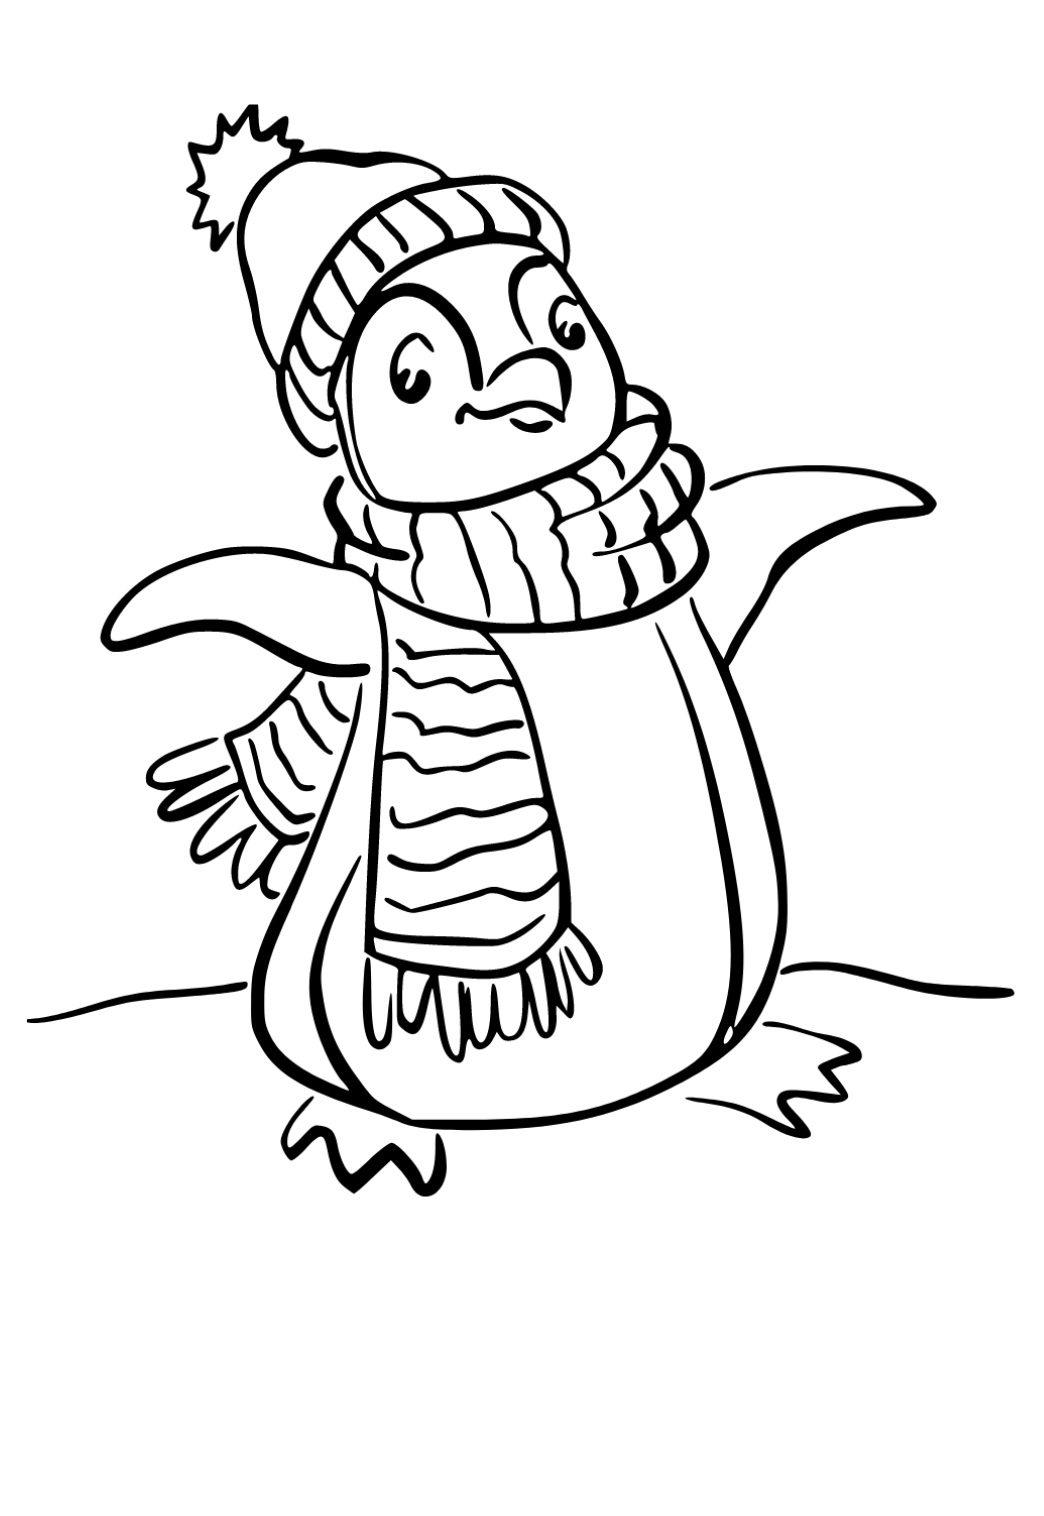 cute penguin coloring pages